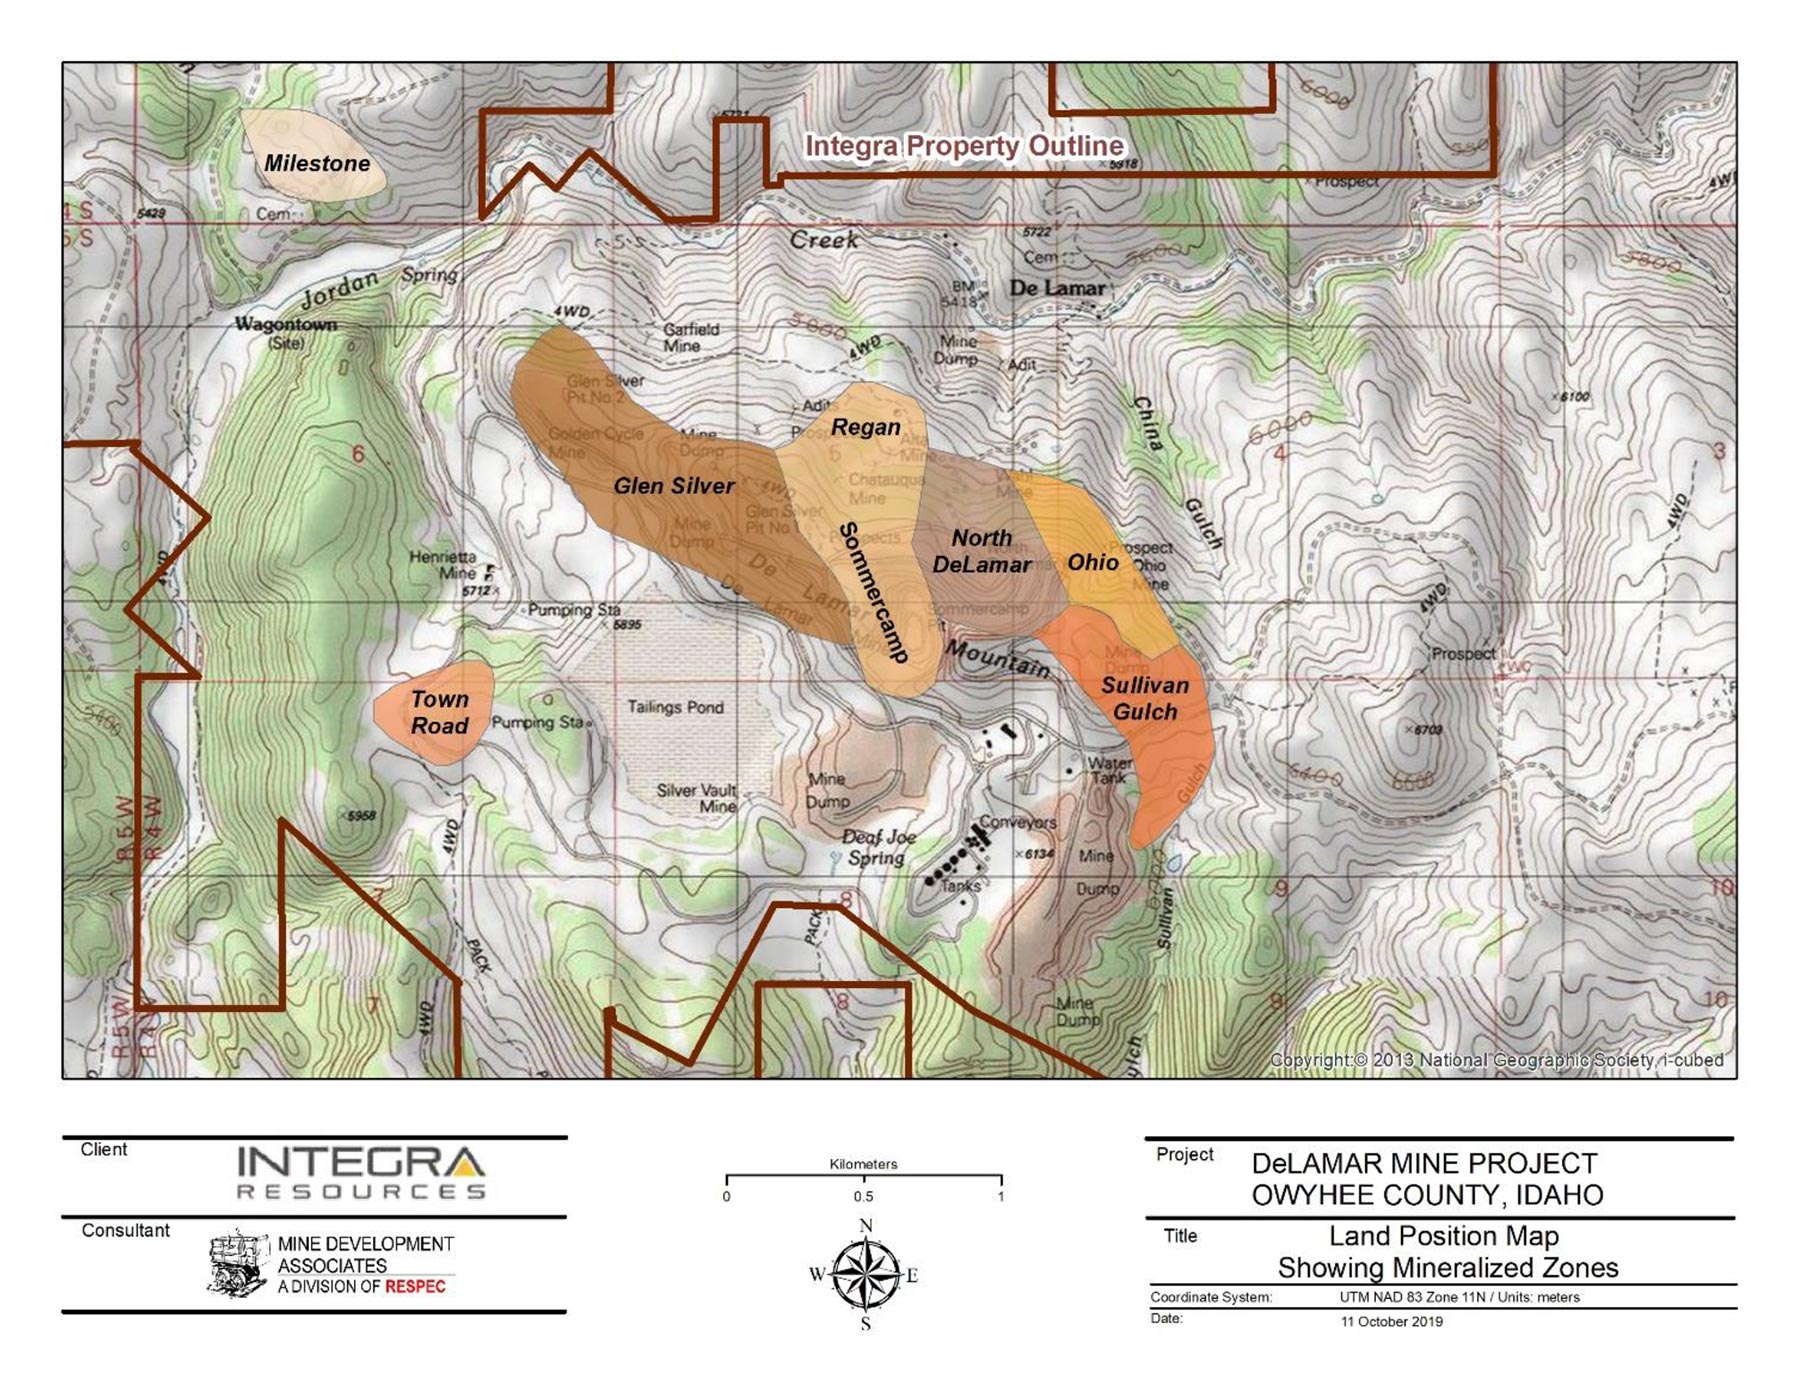 Land Position Map Showing Mineralized Zones